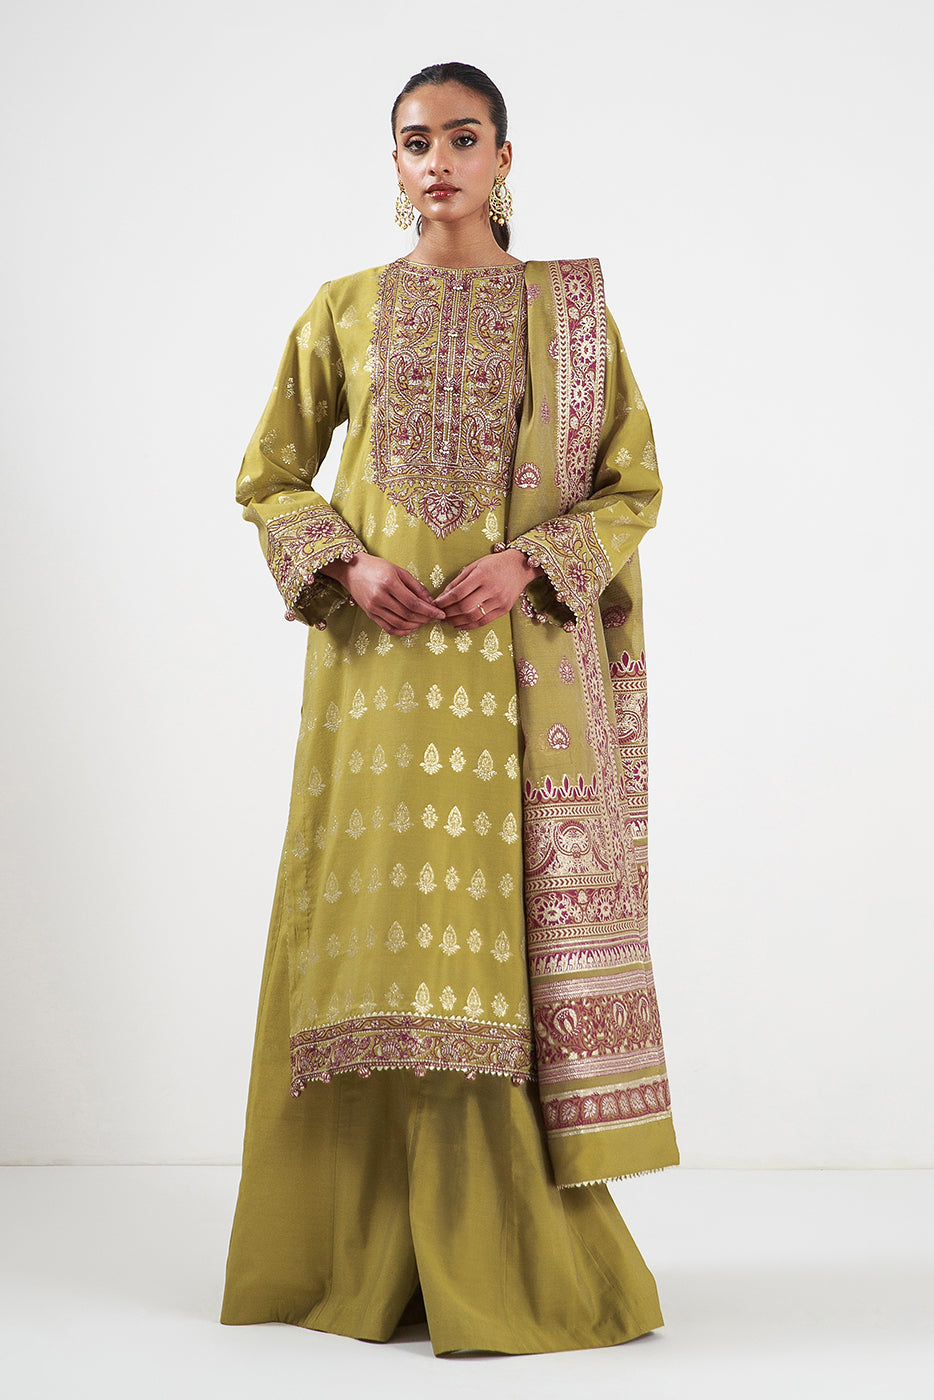 3 PIECE EMBROIDERED JACQUARD SUIT-ETHEREAL BEAUTY (UNSTITCHED) - BEECHTREE